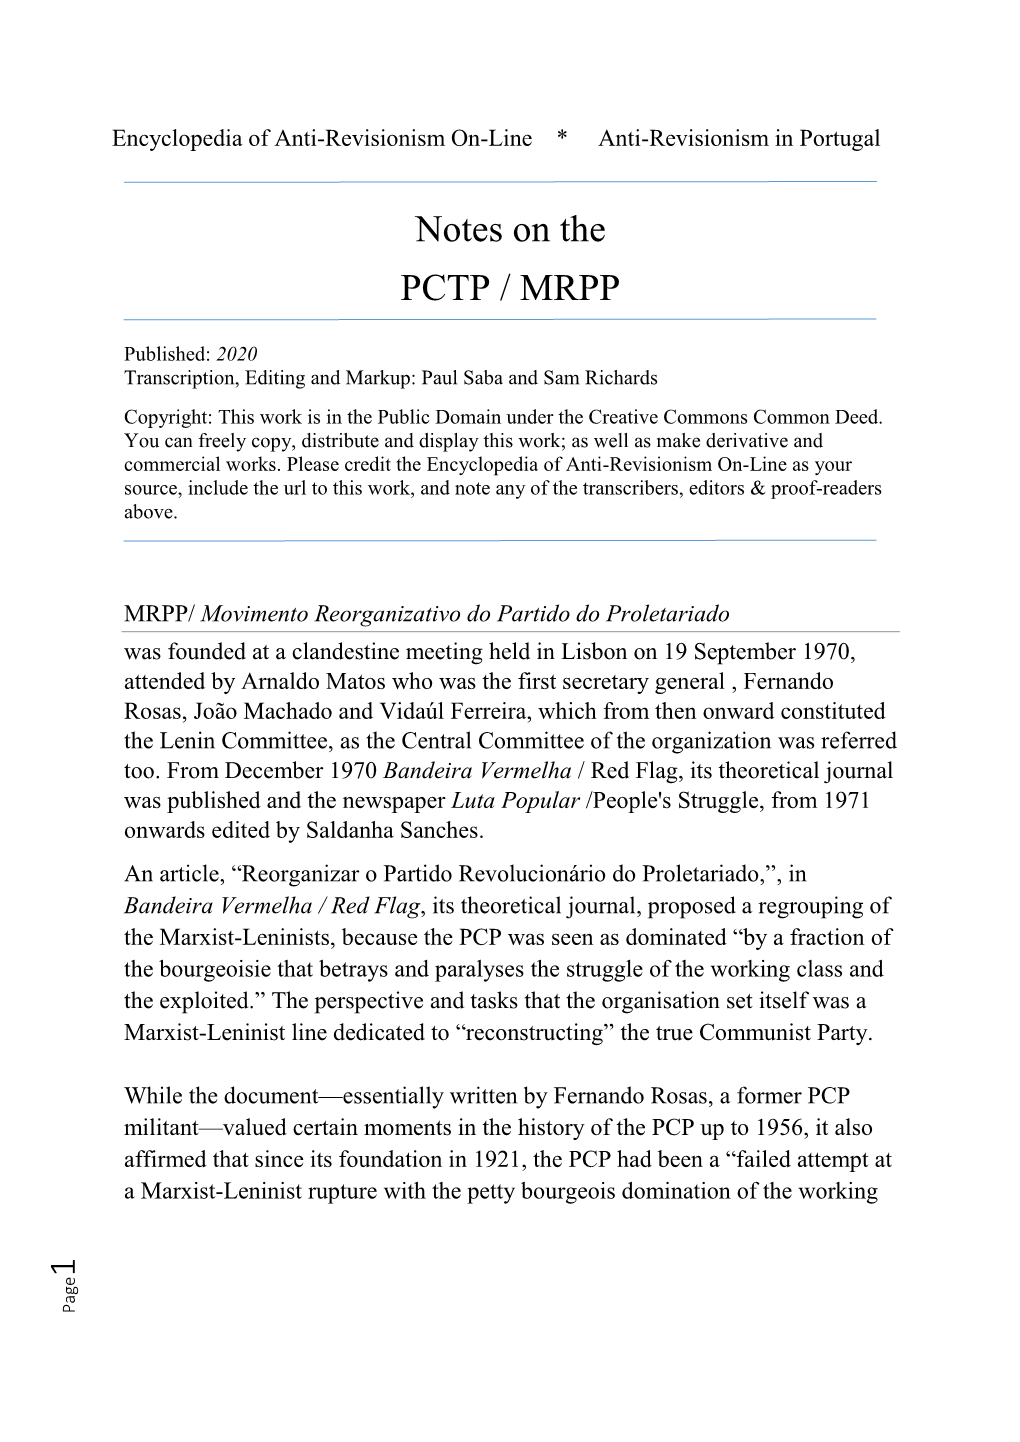 1 Notes on the PCTP / MRPP